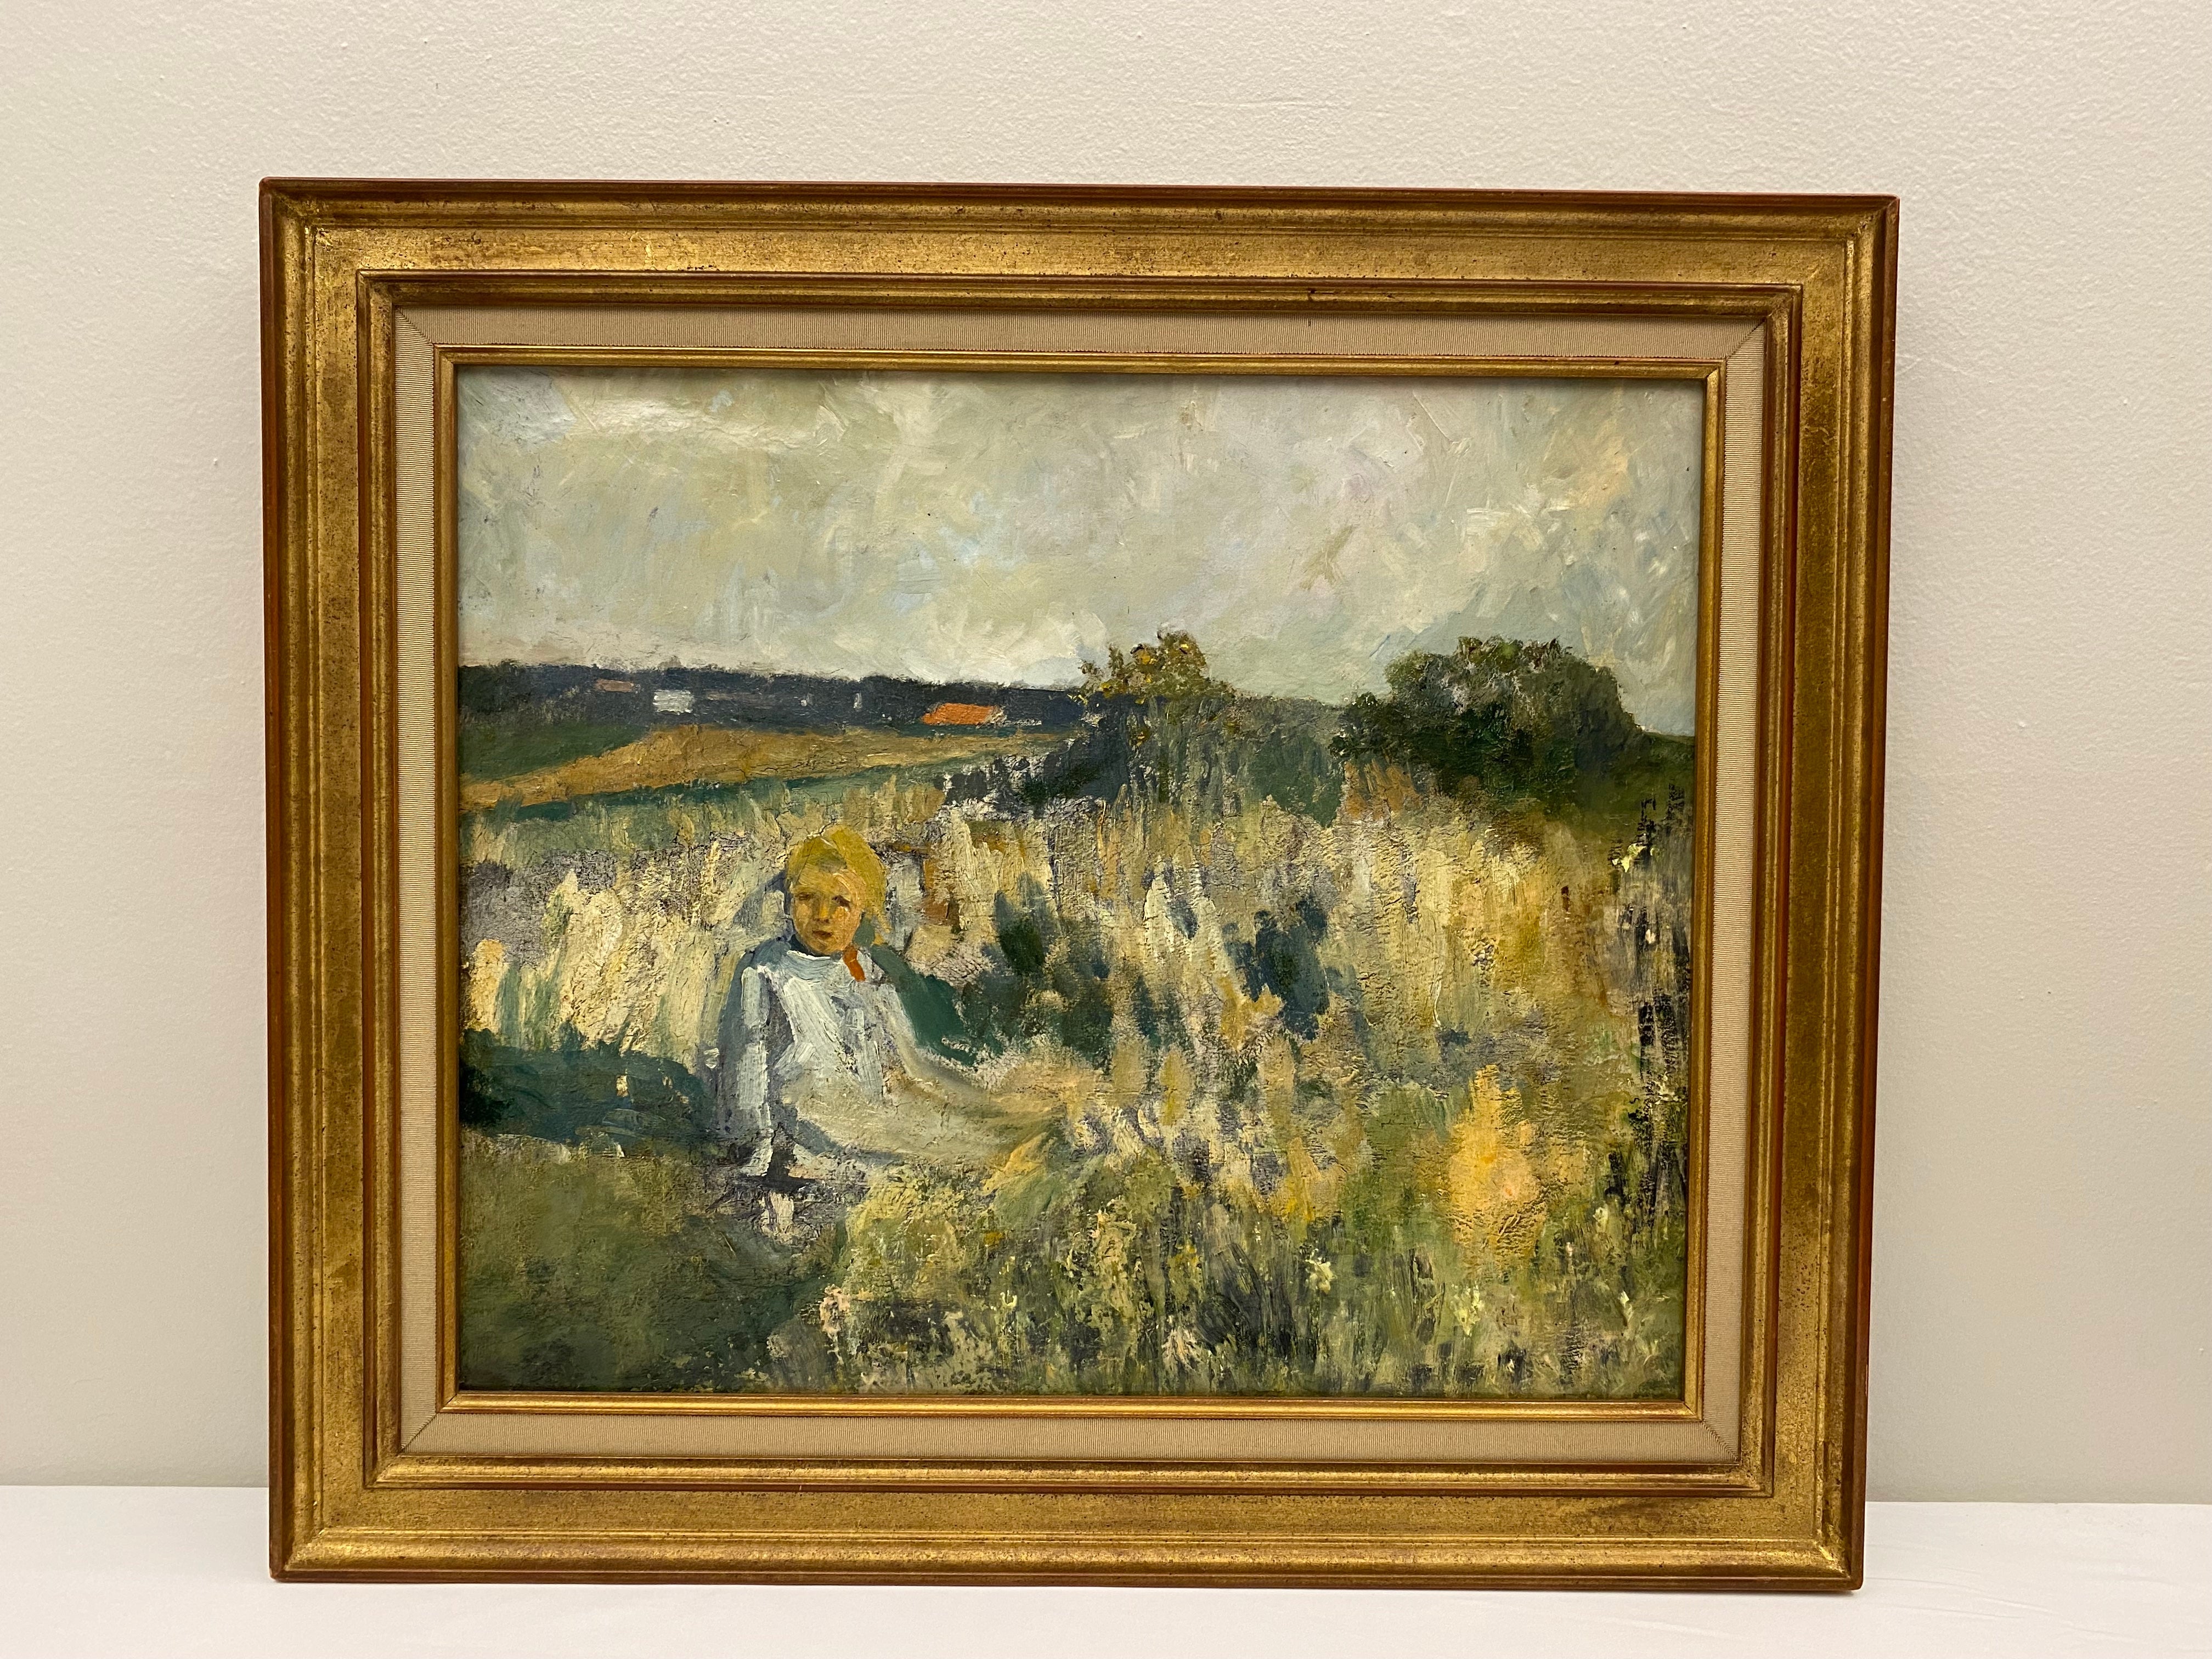 Child Seated in a Field in Provence
French Post-Impressionist School, circa 1950's
Oil painting on canvas, framed in a Montparnasse style frame
Framed: 26.50 x 23 inches

Provenance: private collection, France
Condition: very good and sound